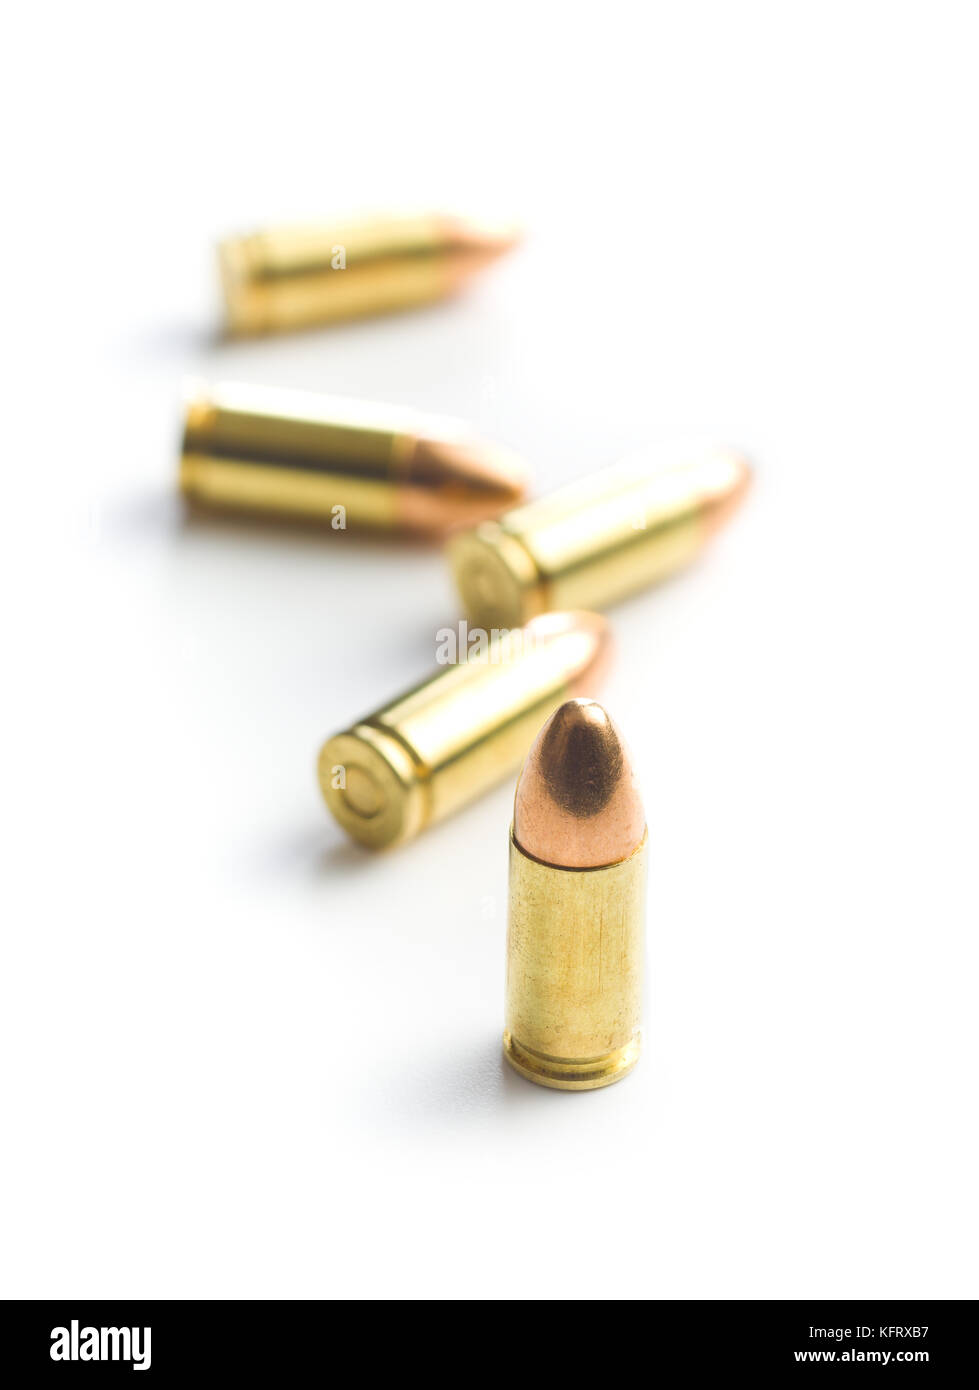 Cup of bullets - isolated stock photo. Image of danger - 150727228